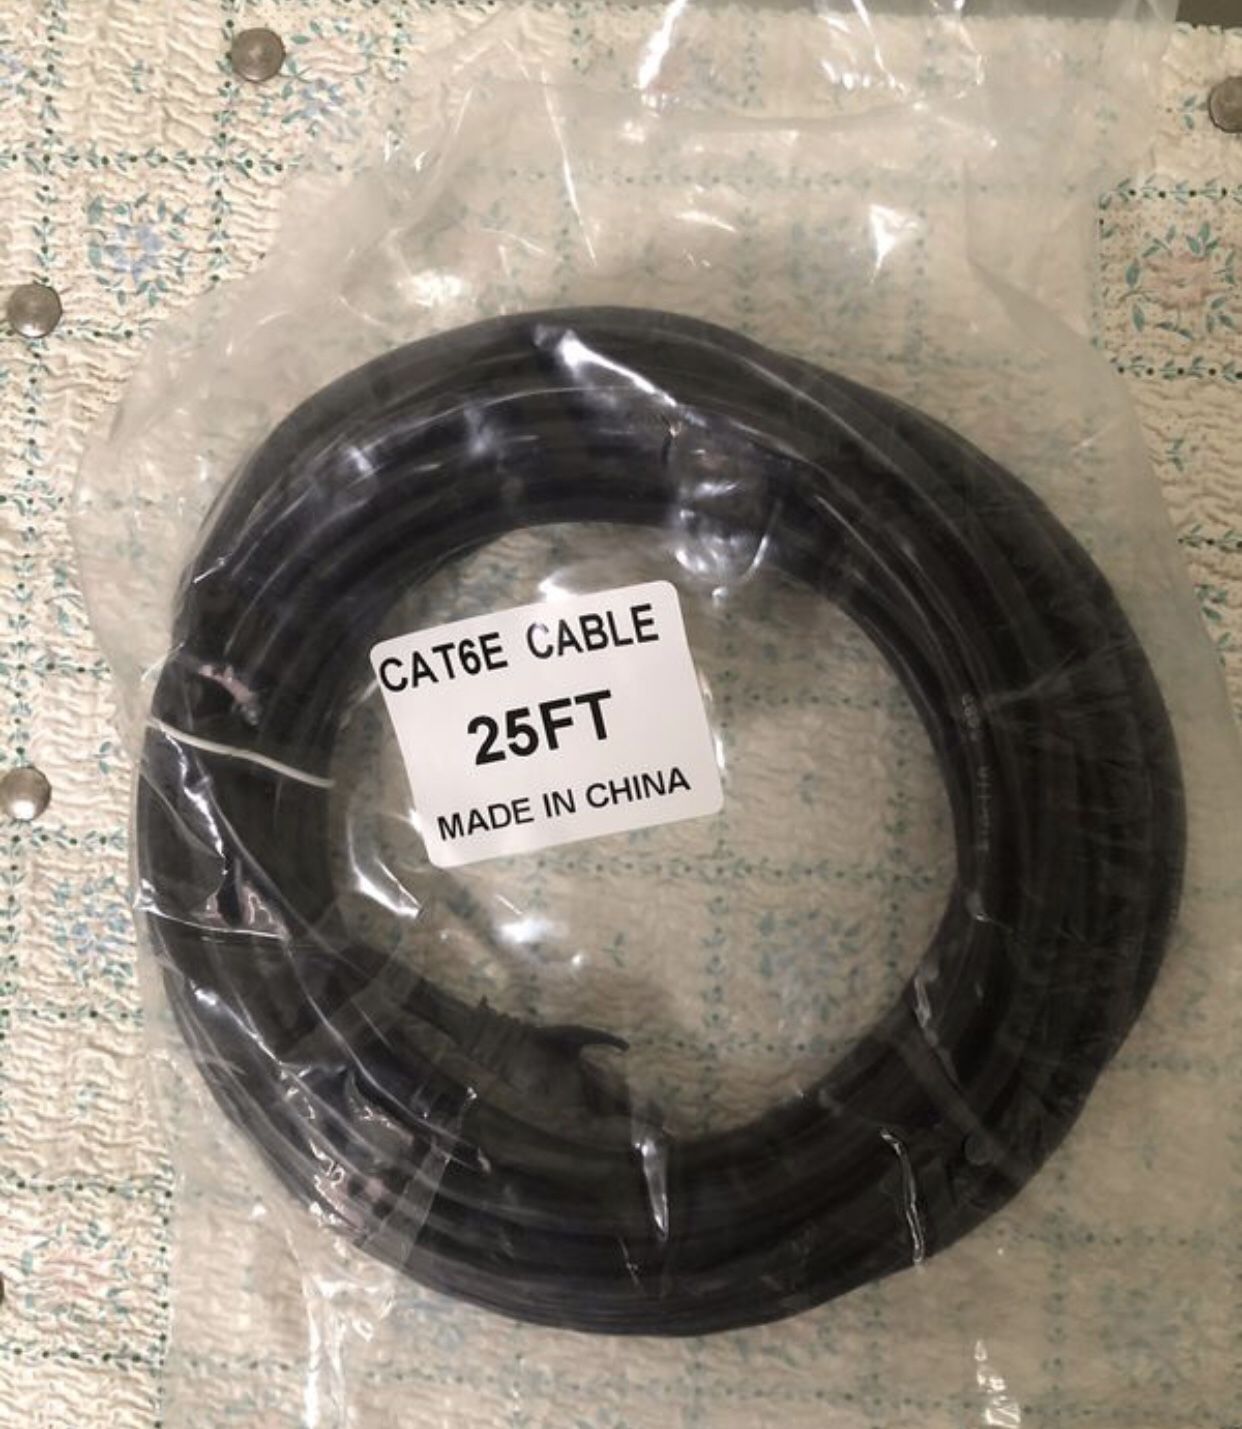 25 ft CAT 6 Ethernet cable BRAND NEW for Line 6 amp , FBV EXPRESS or MKII, FOOT CONTROLLER, POD, Guitar, Fender, Bass, modem, effects